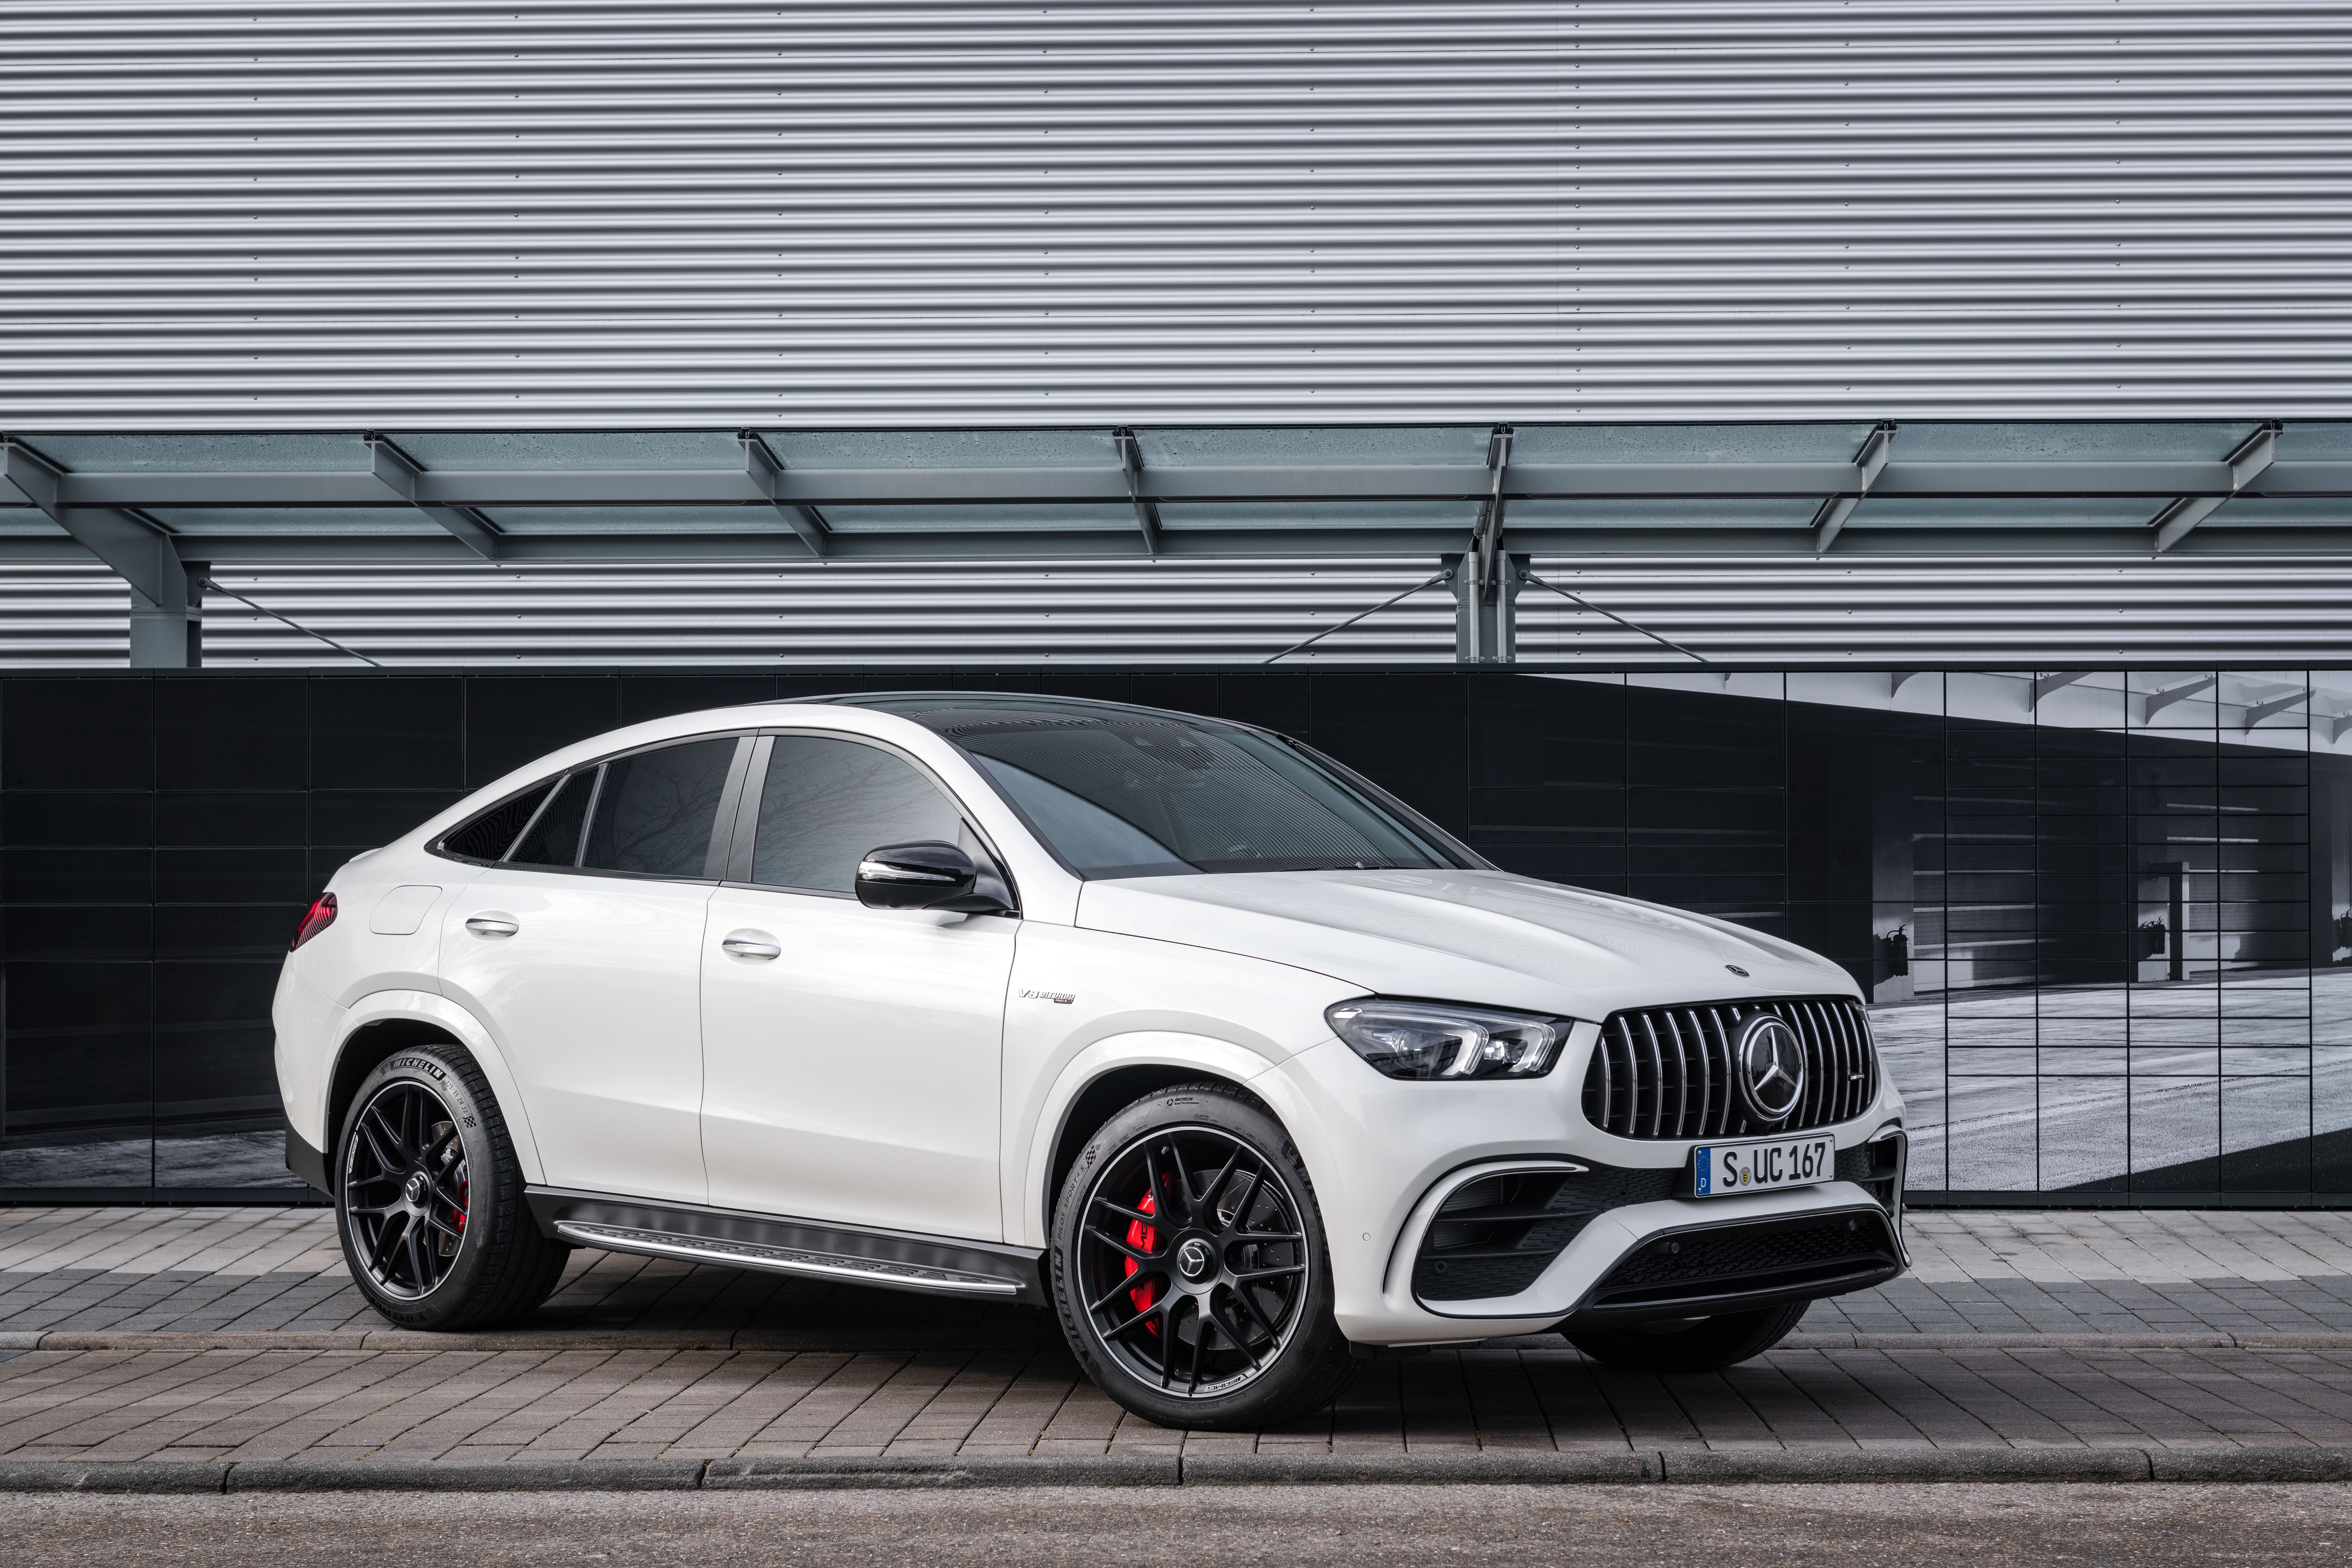 Tested: 2021 Mercedes-AMG GLE63 S Bolts to 60 in 3.4 Seconds